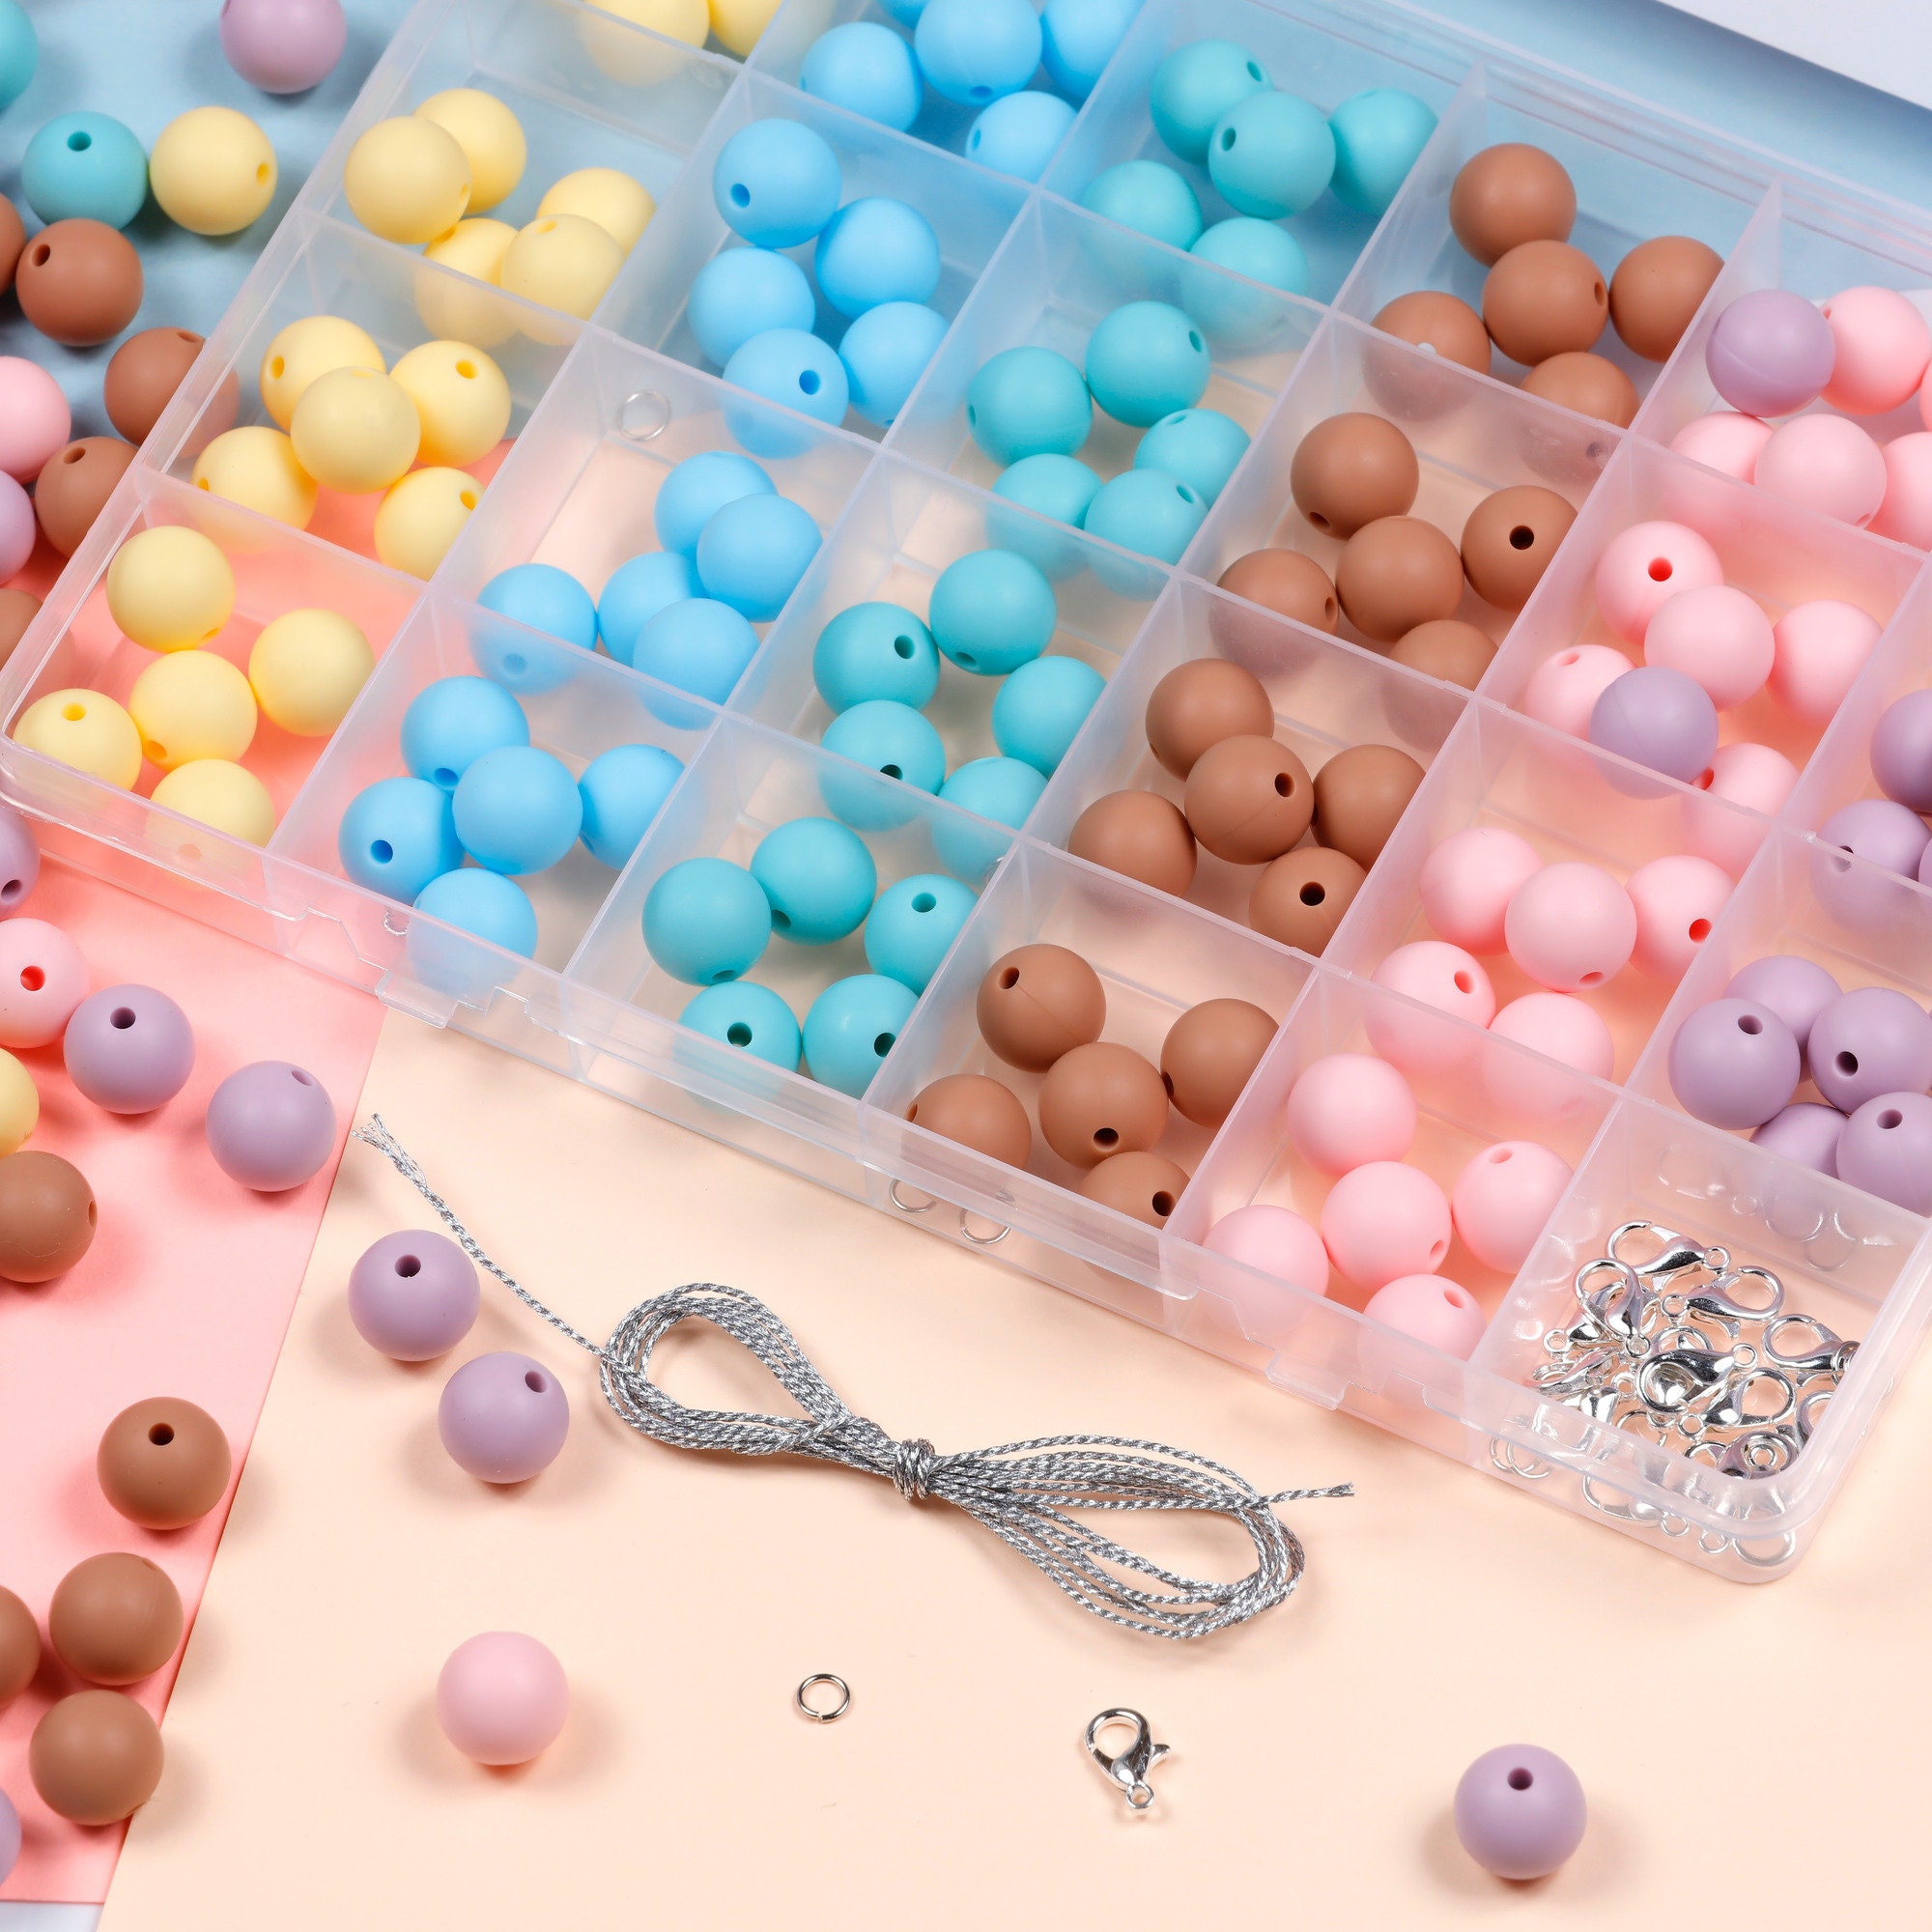 Incraftables Silicone Beads for Keychain Making 120pcs Kit 6 Colors Rubber Beads for Kids & Adults. 12mm Silicone Beads for Jewe